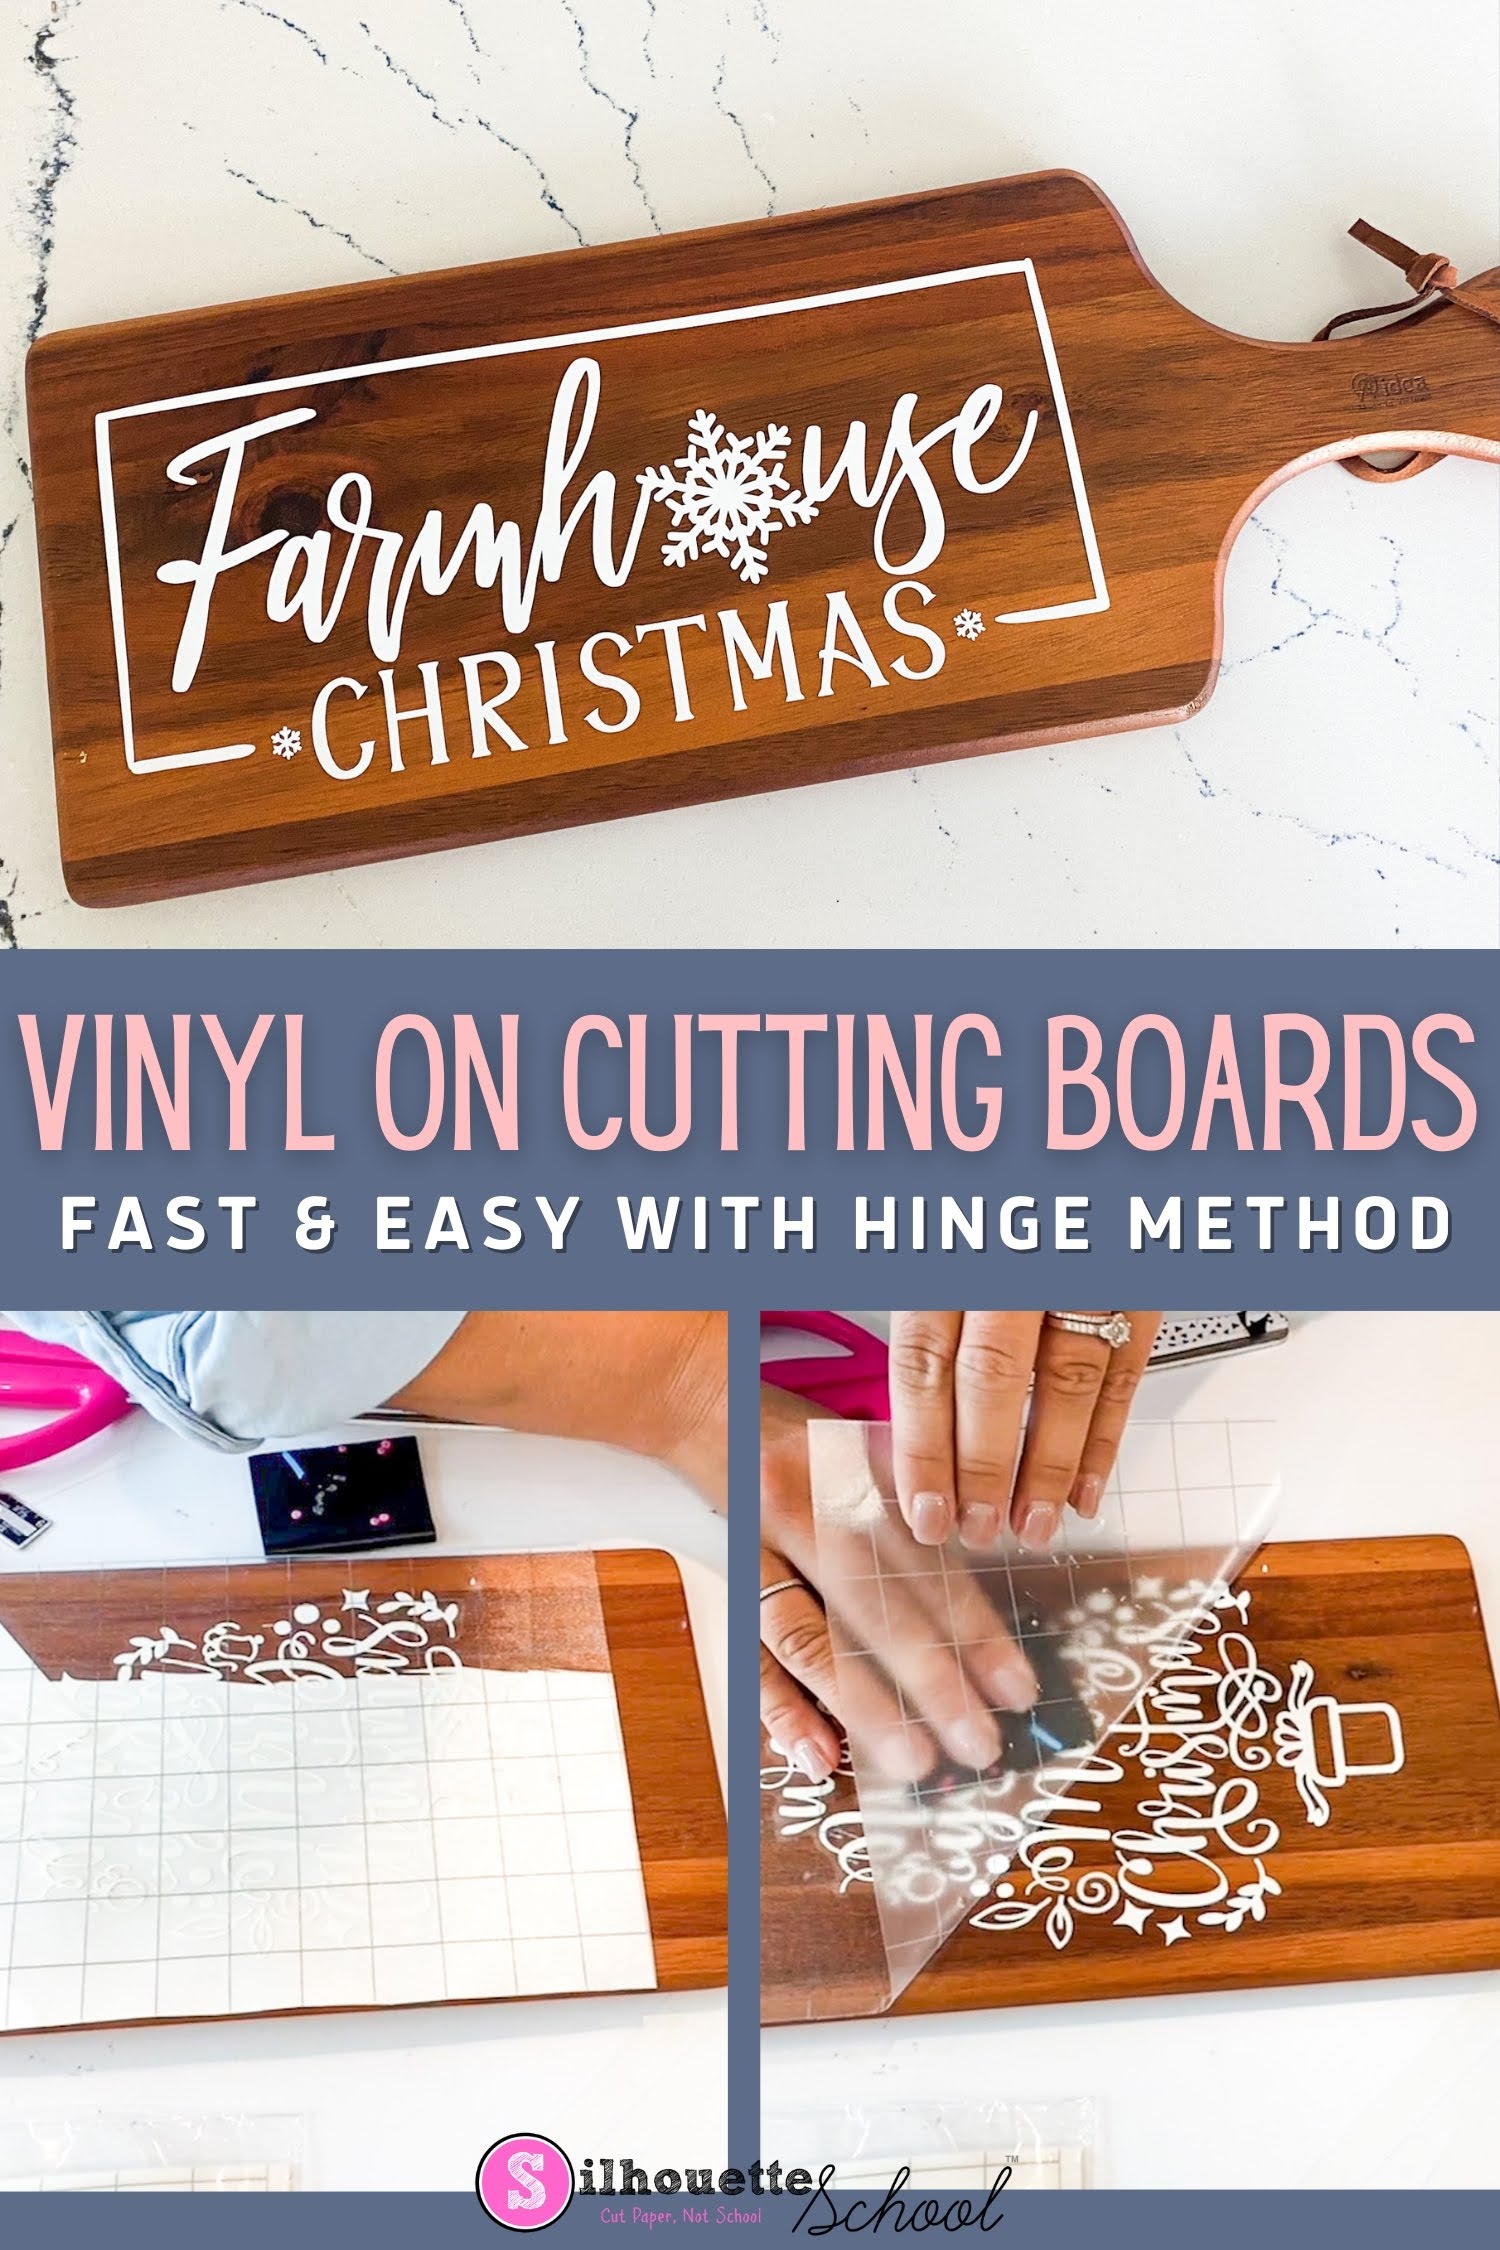 How to Put Vinyl on Wood Cutting Boards - Silhouette School